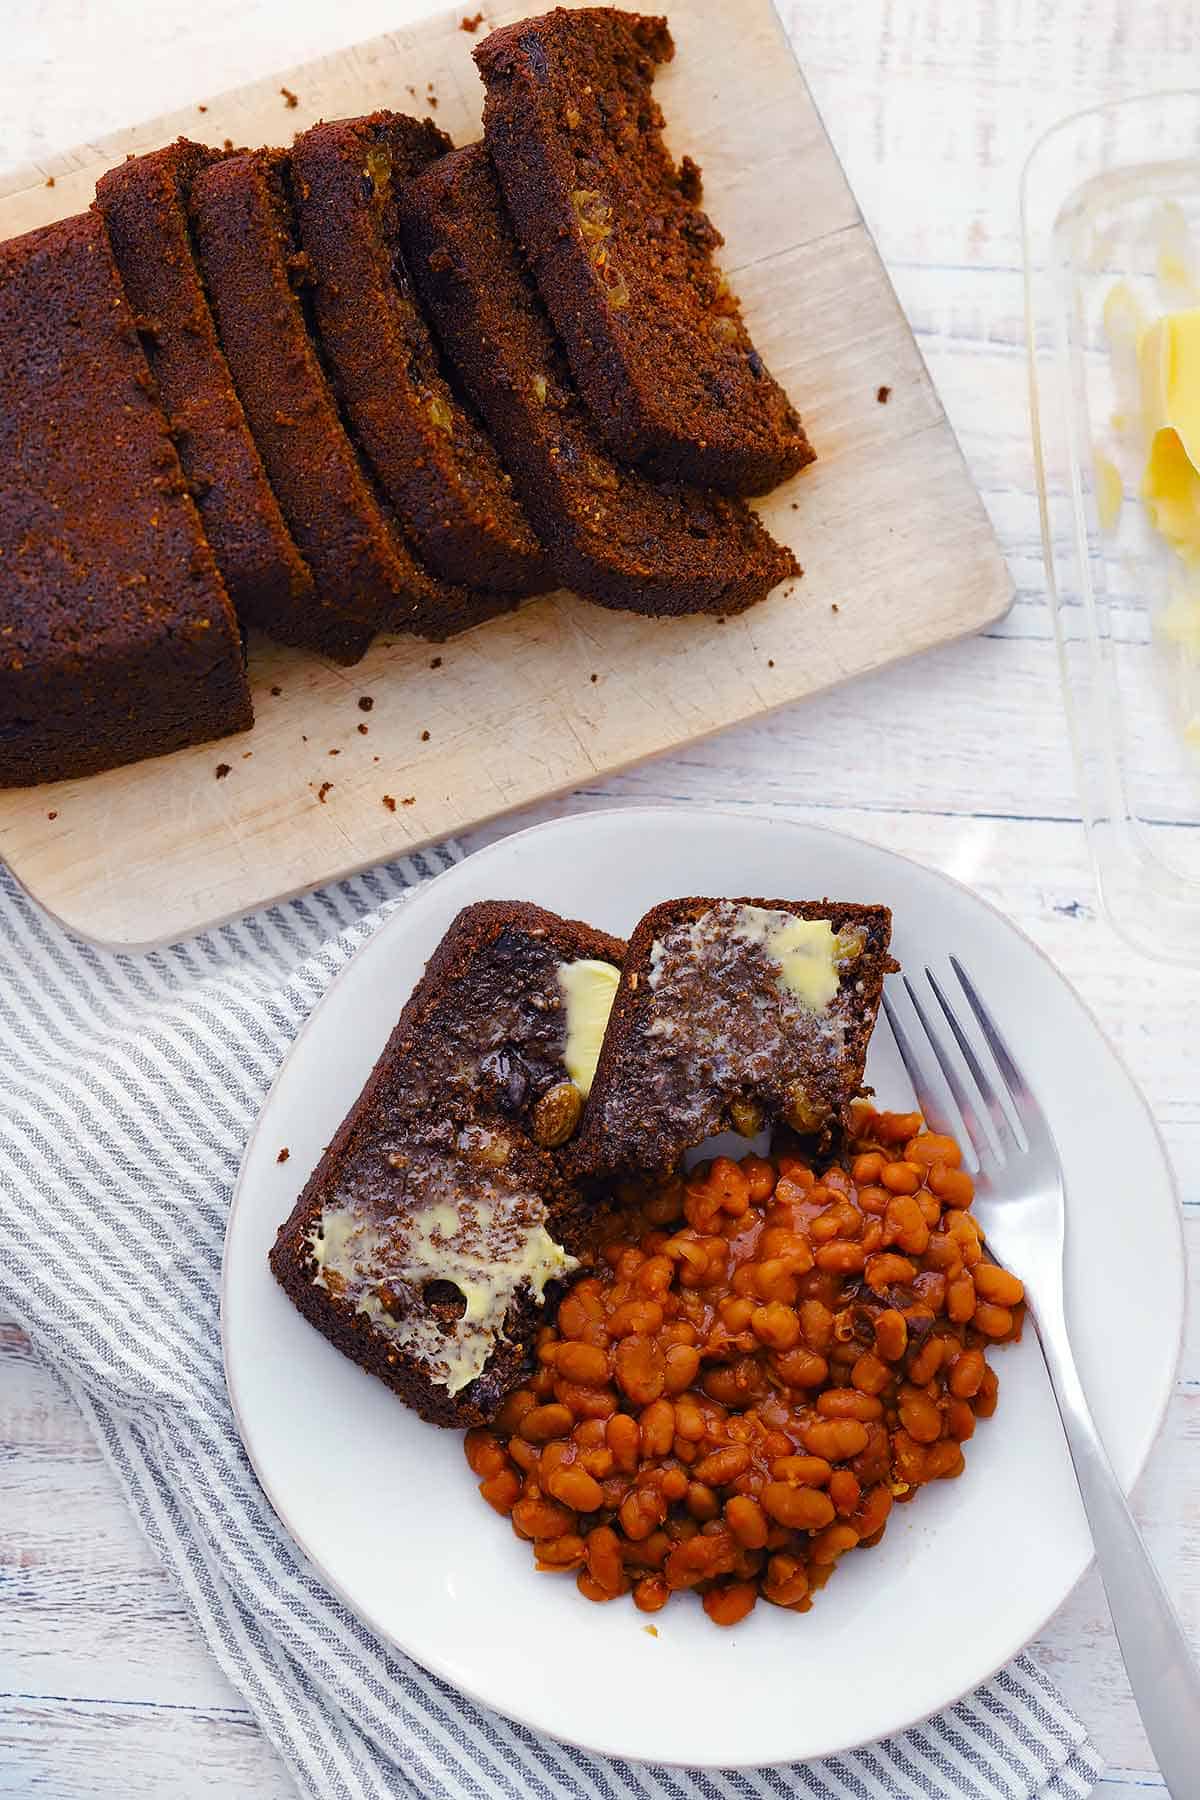 Overhead photo of a sliced loaf of Boston brown bread and a plate with slices and beans.